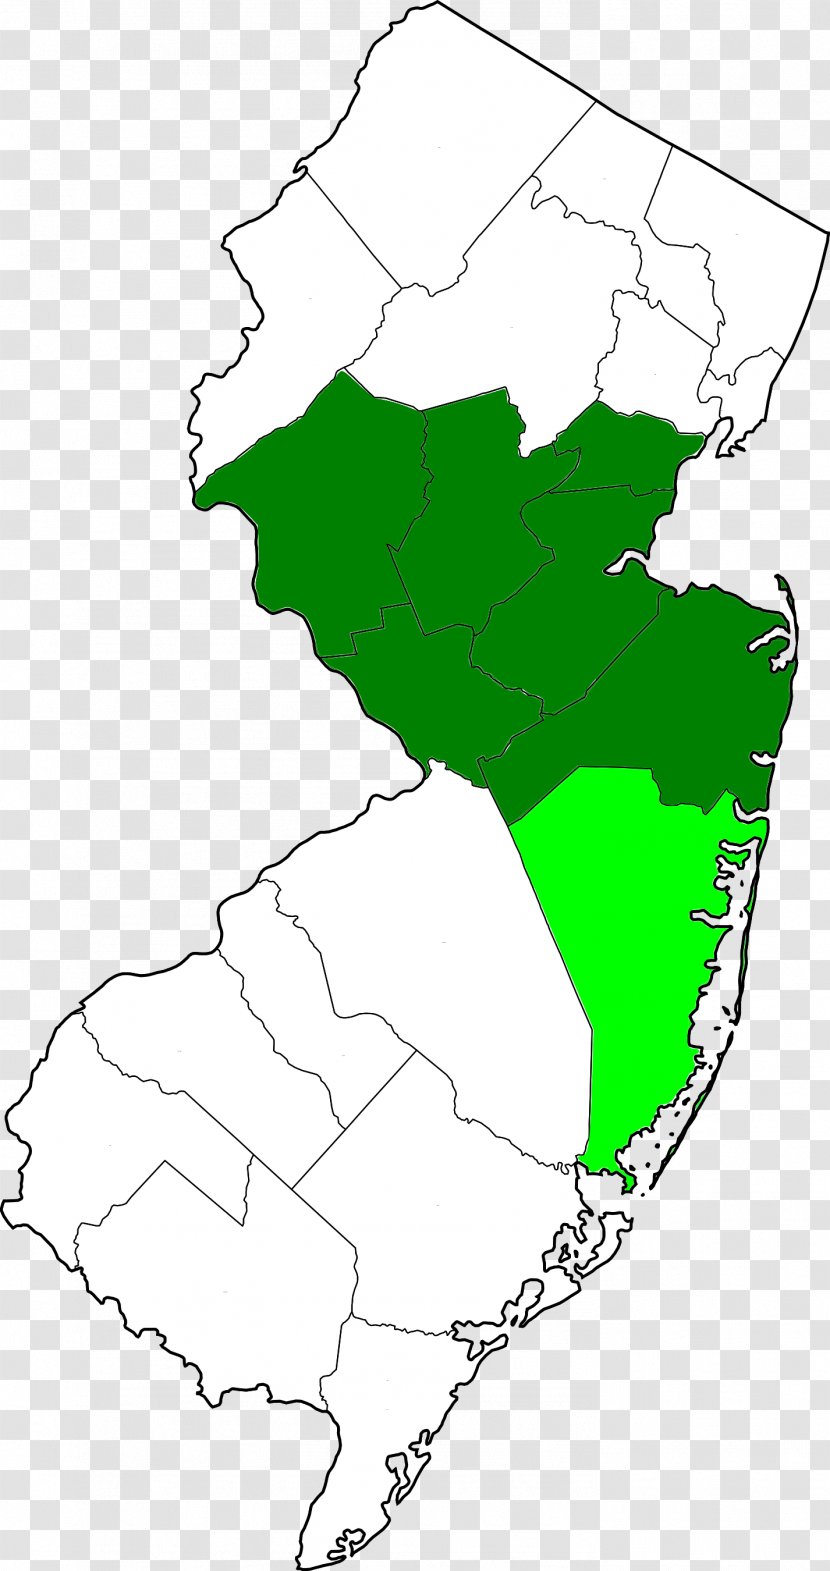 Middlesex County Central Jersey Hudson County, New Burlington Ocean - North Transparent PNG